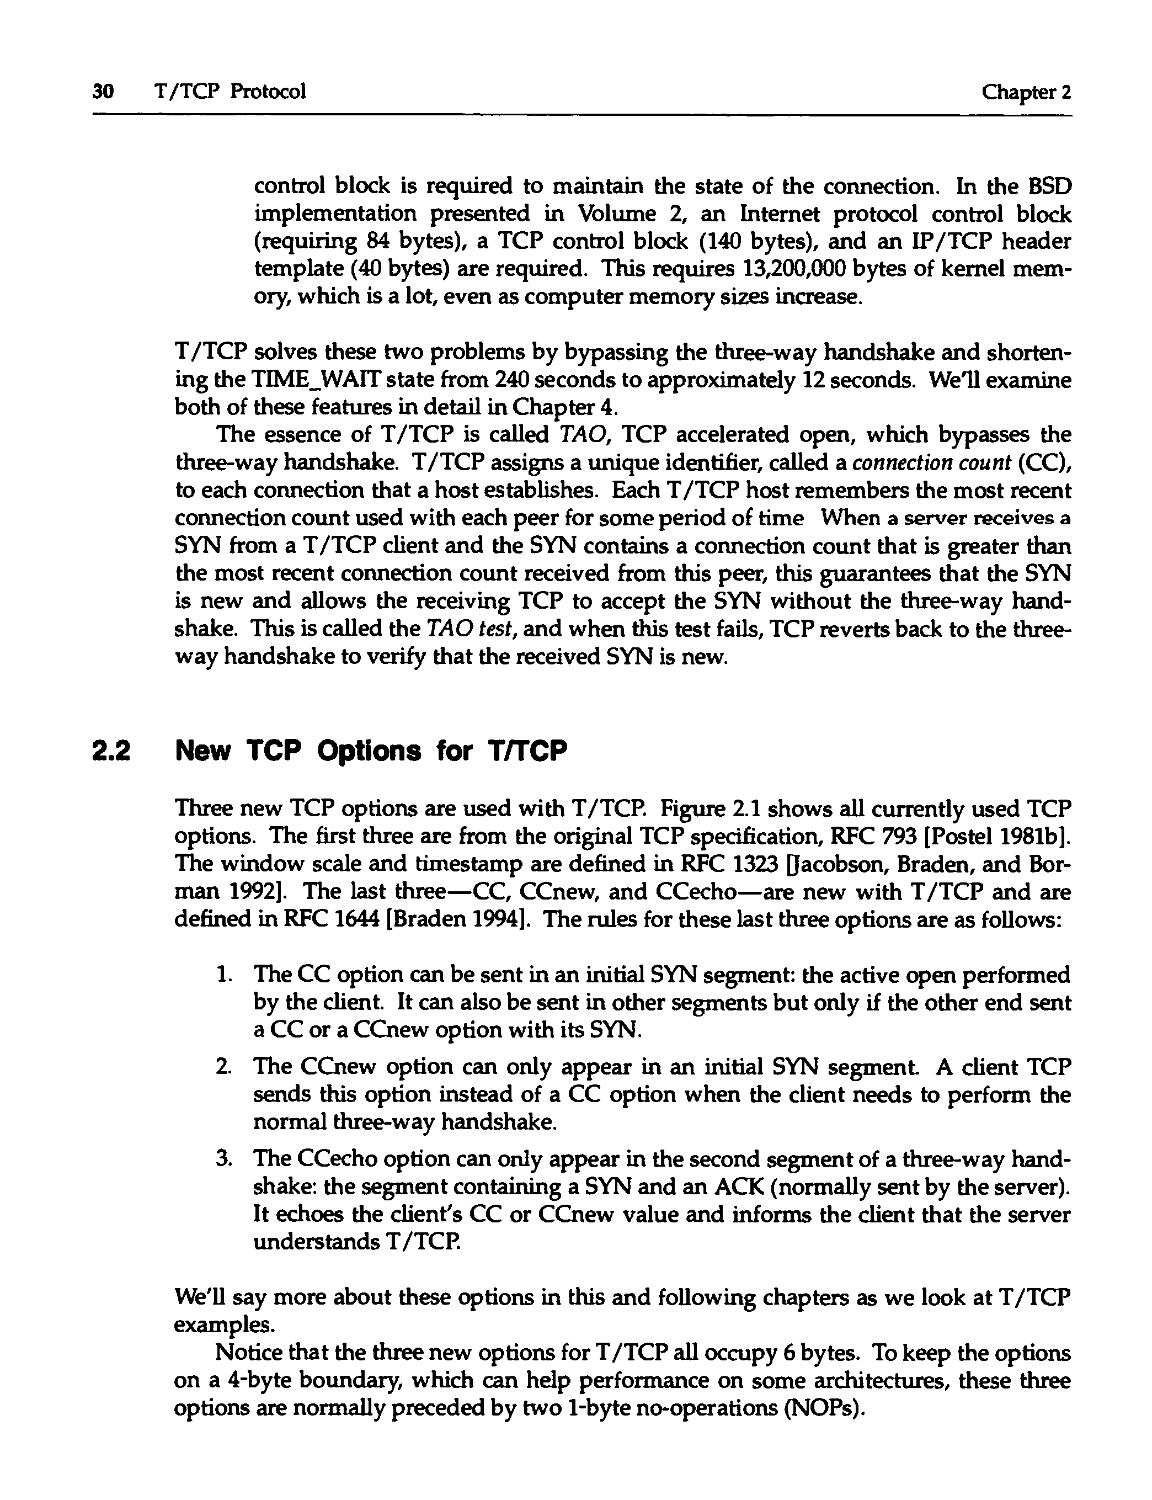 2.2 New TCP Options for T/TCP